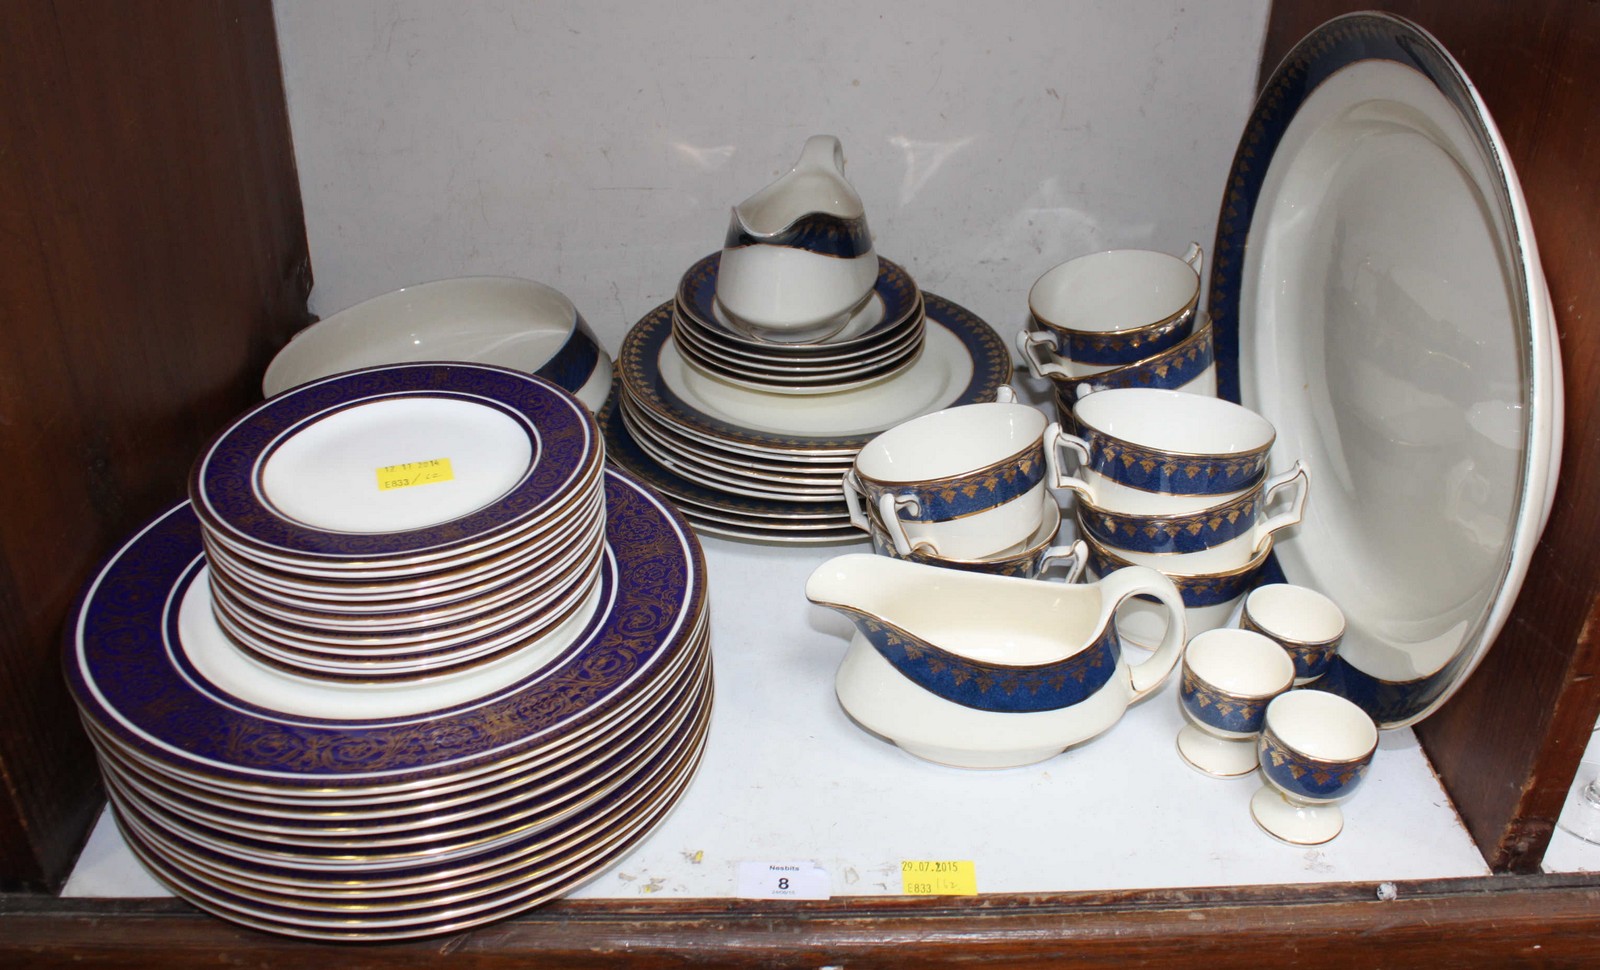 SECTION 8. A quantity of Royal Doulton Imperial Blue dinner and side plates, together with a similar